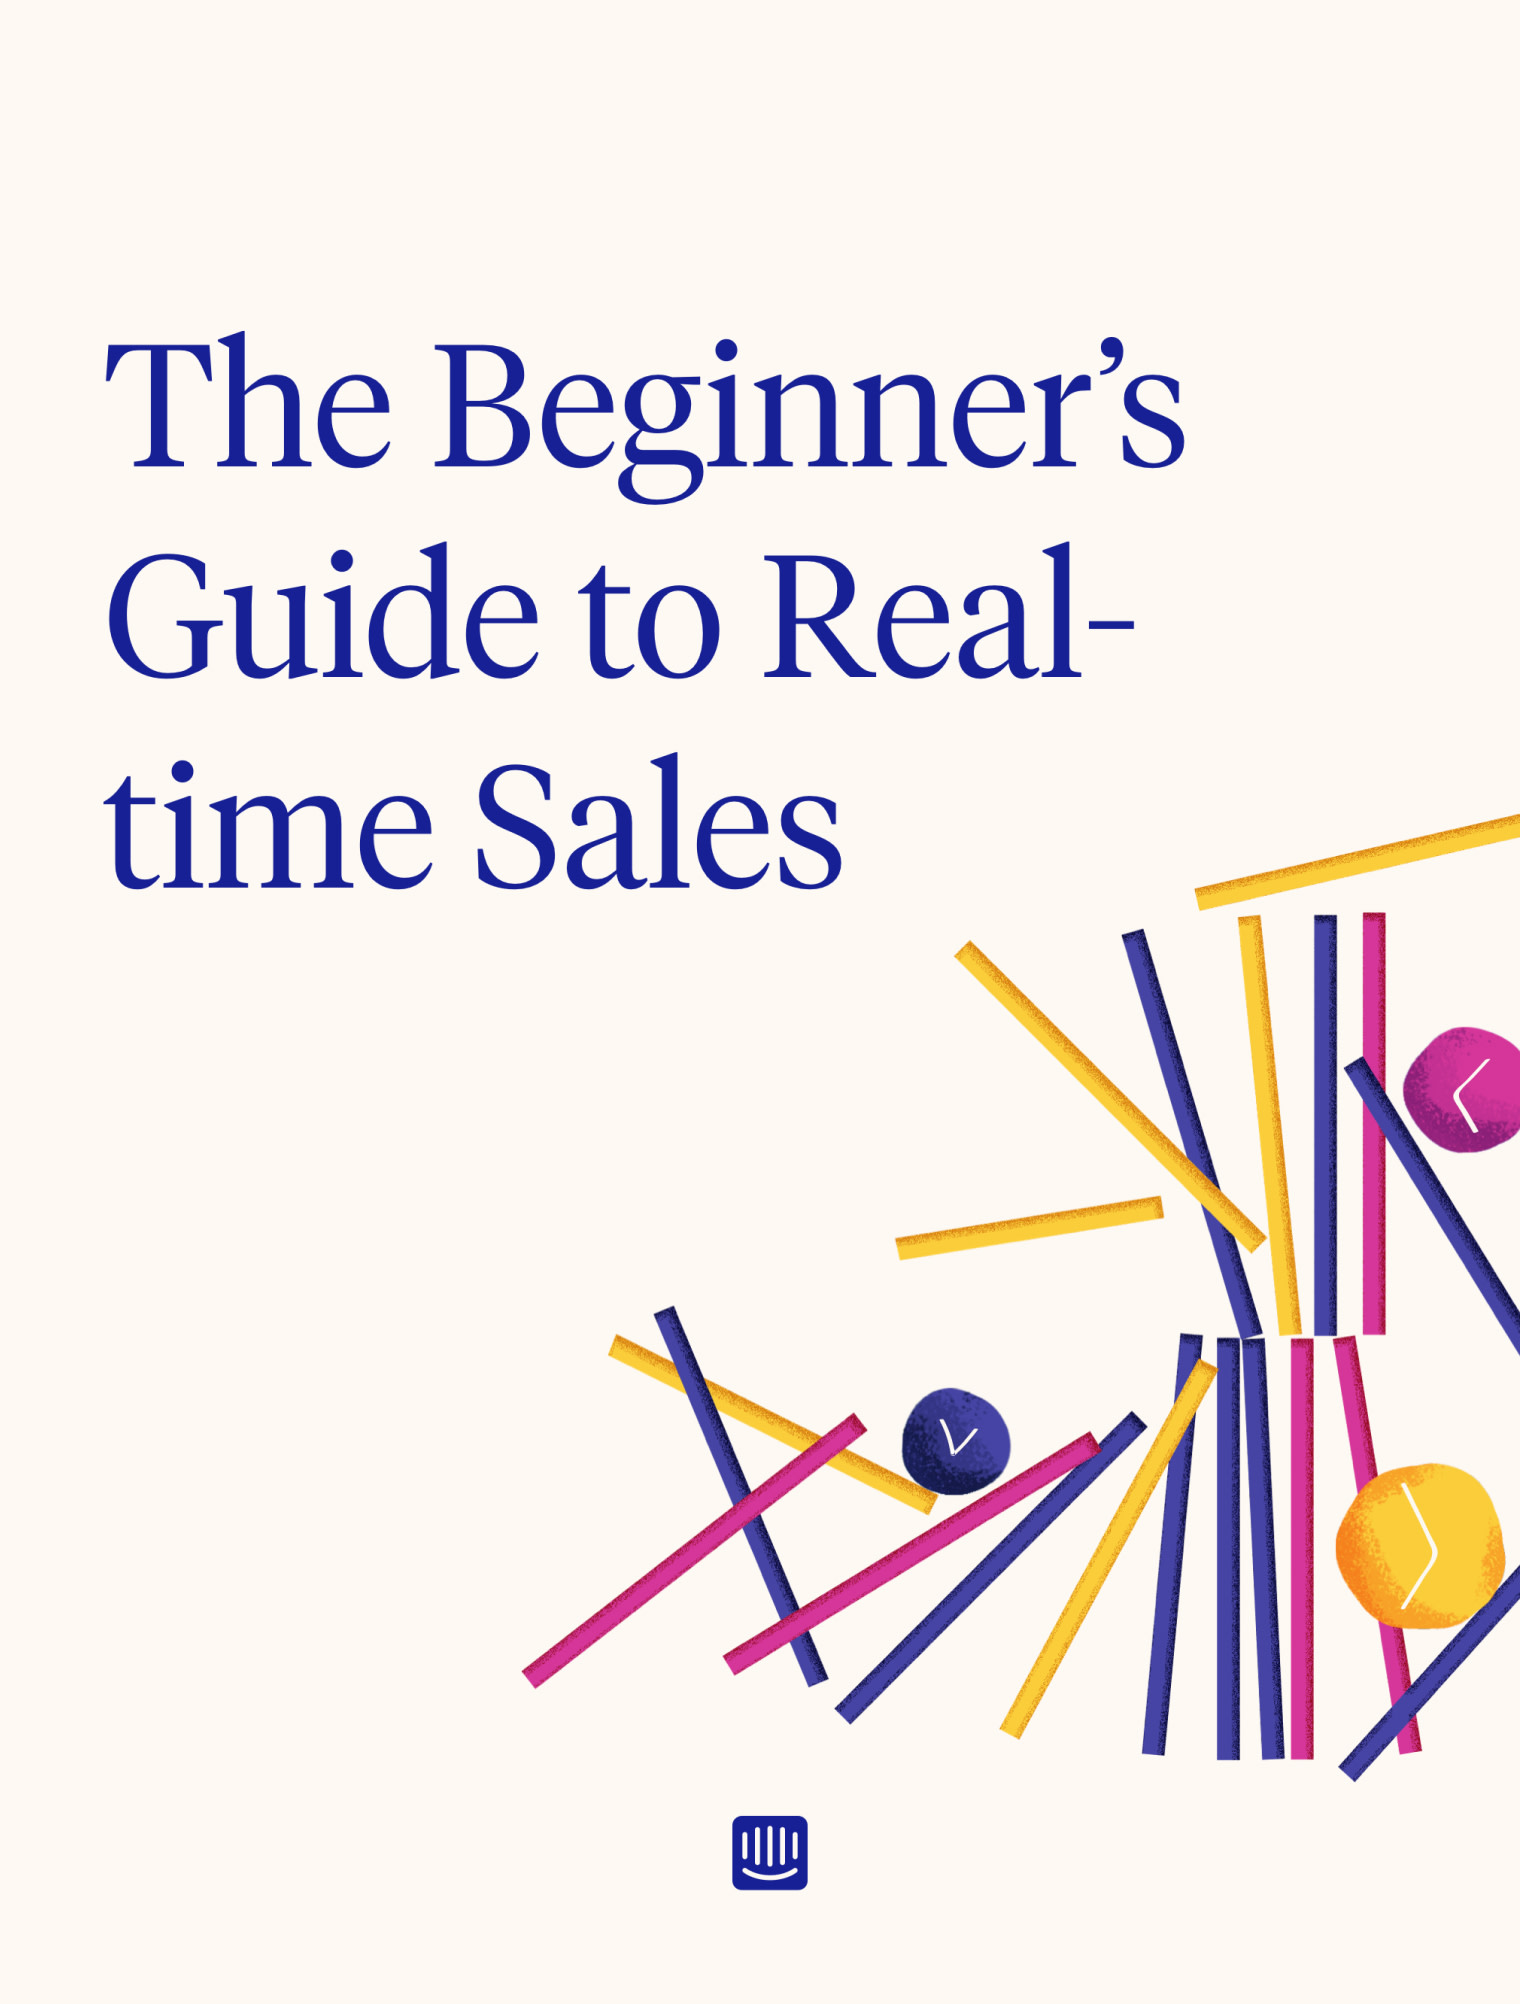 The Beginner's Guide to Real-time Sales